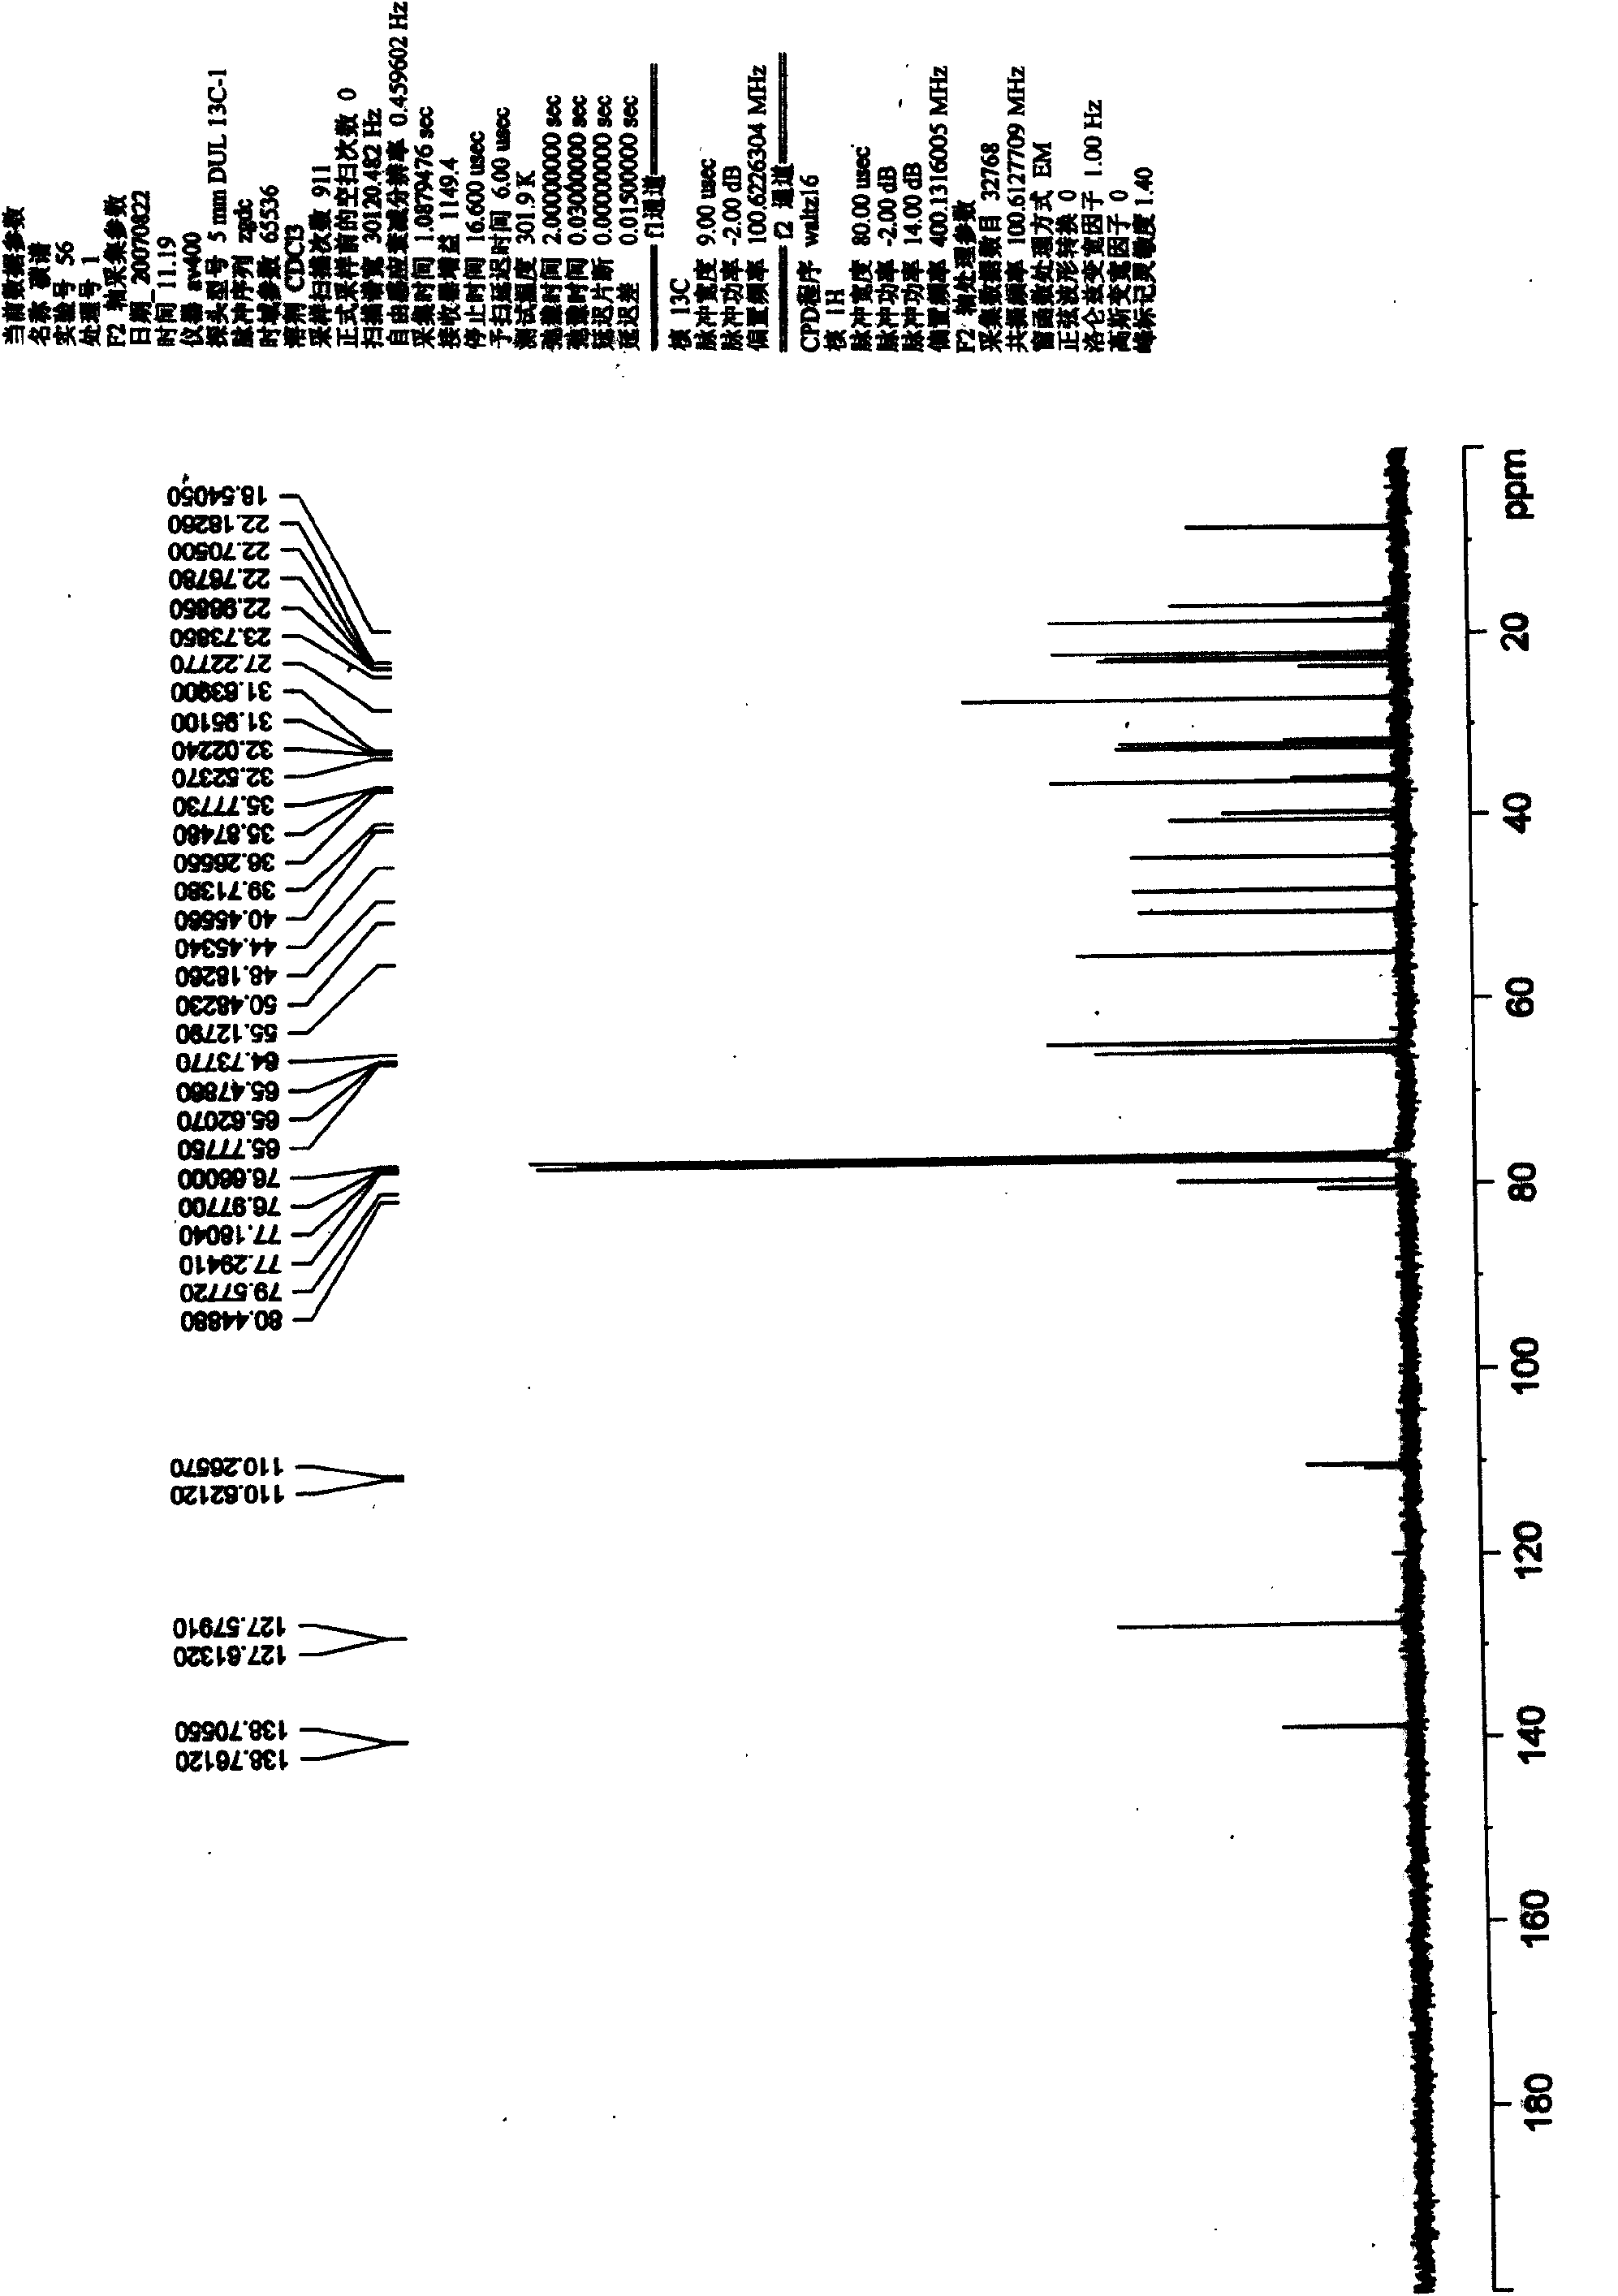 Kirenol derivative and application thereof in preparation of proinflammatory cytokine inhibitor